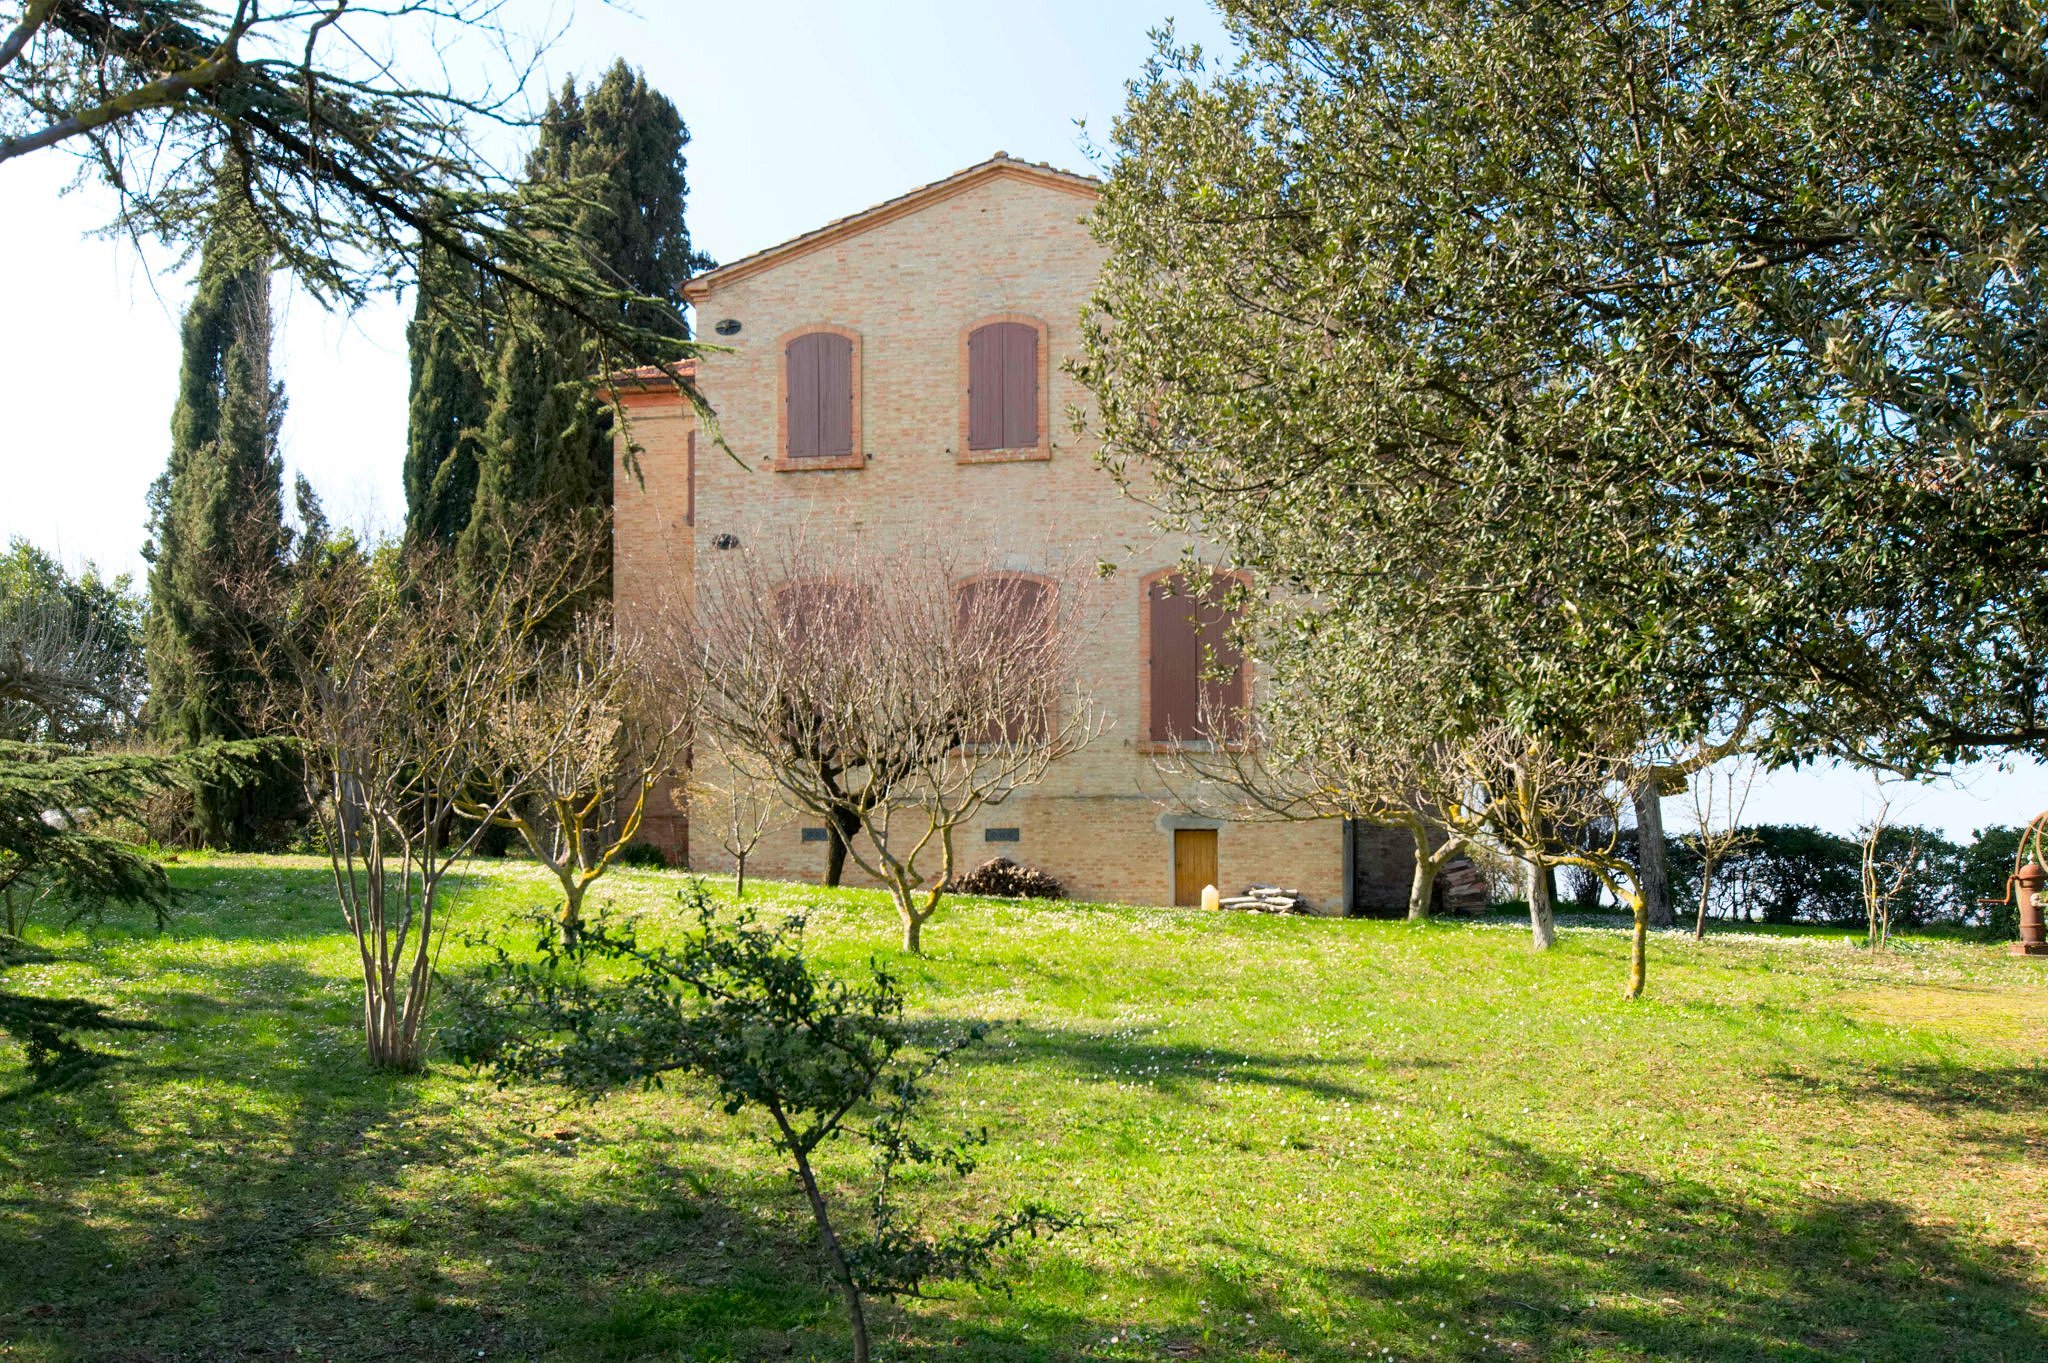 For Sale In The Marche Italy Country House In Nice Location